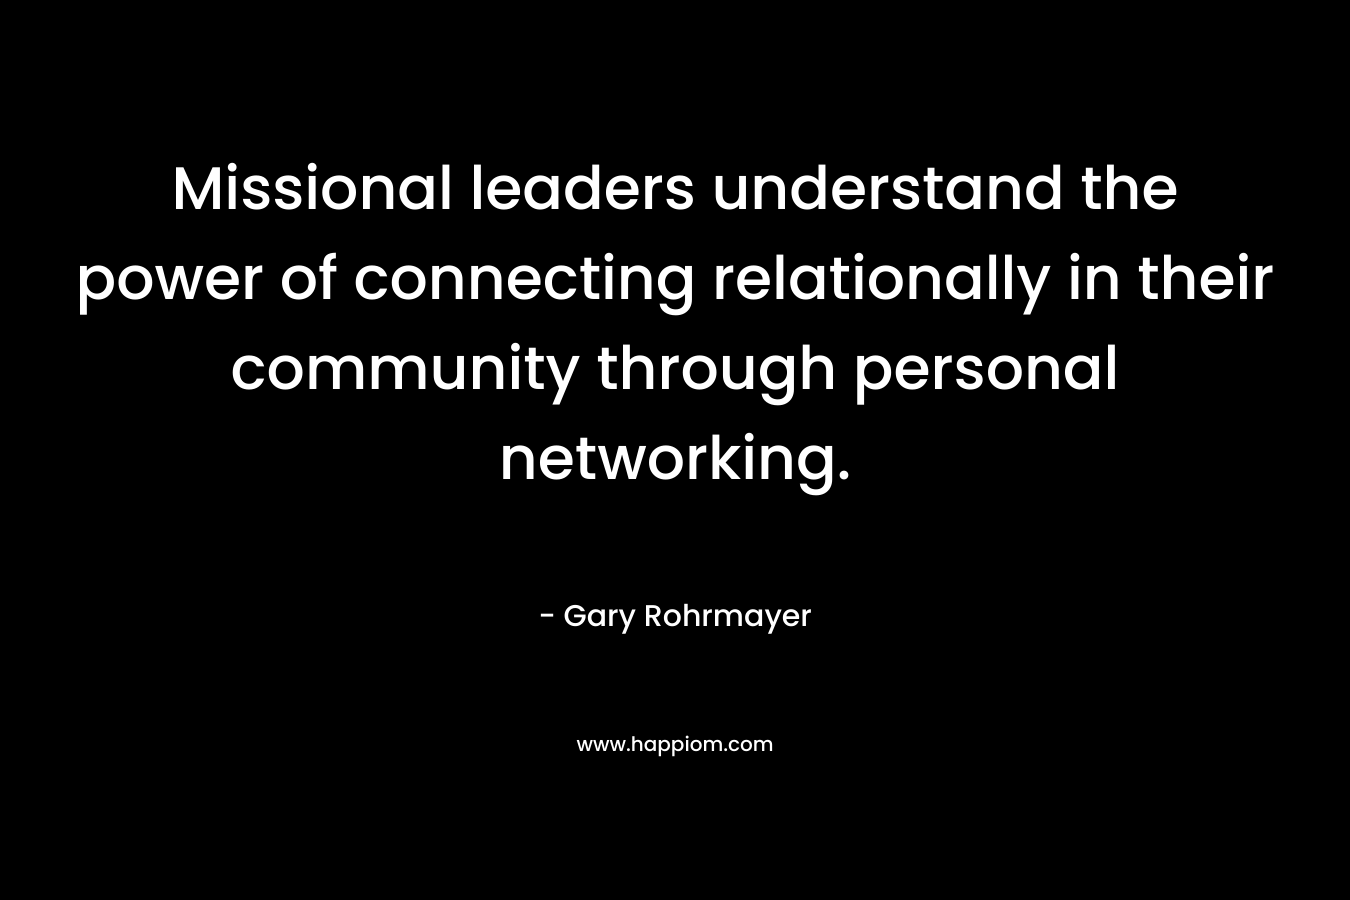 Missional leaders understand the power of connecting relationally in their community through personal networking. – Gary Rohrmayer